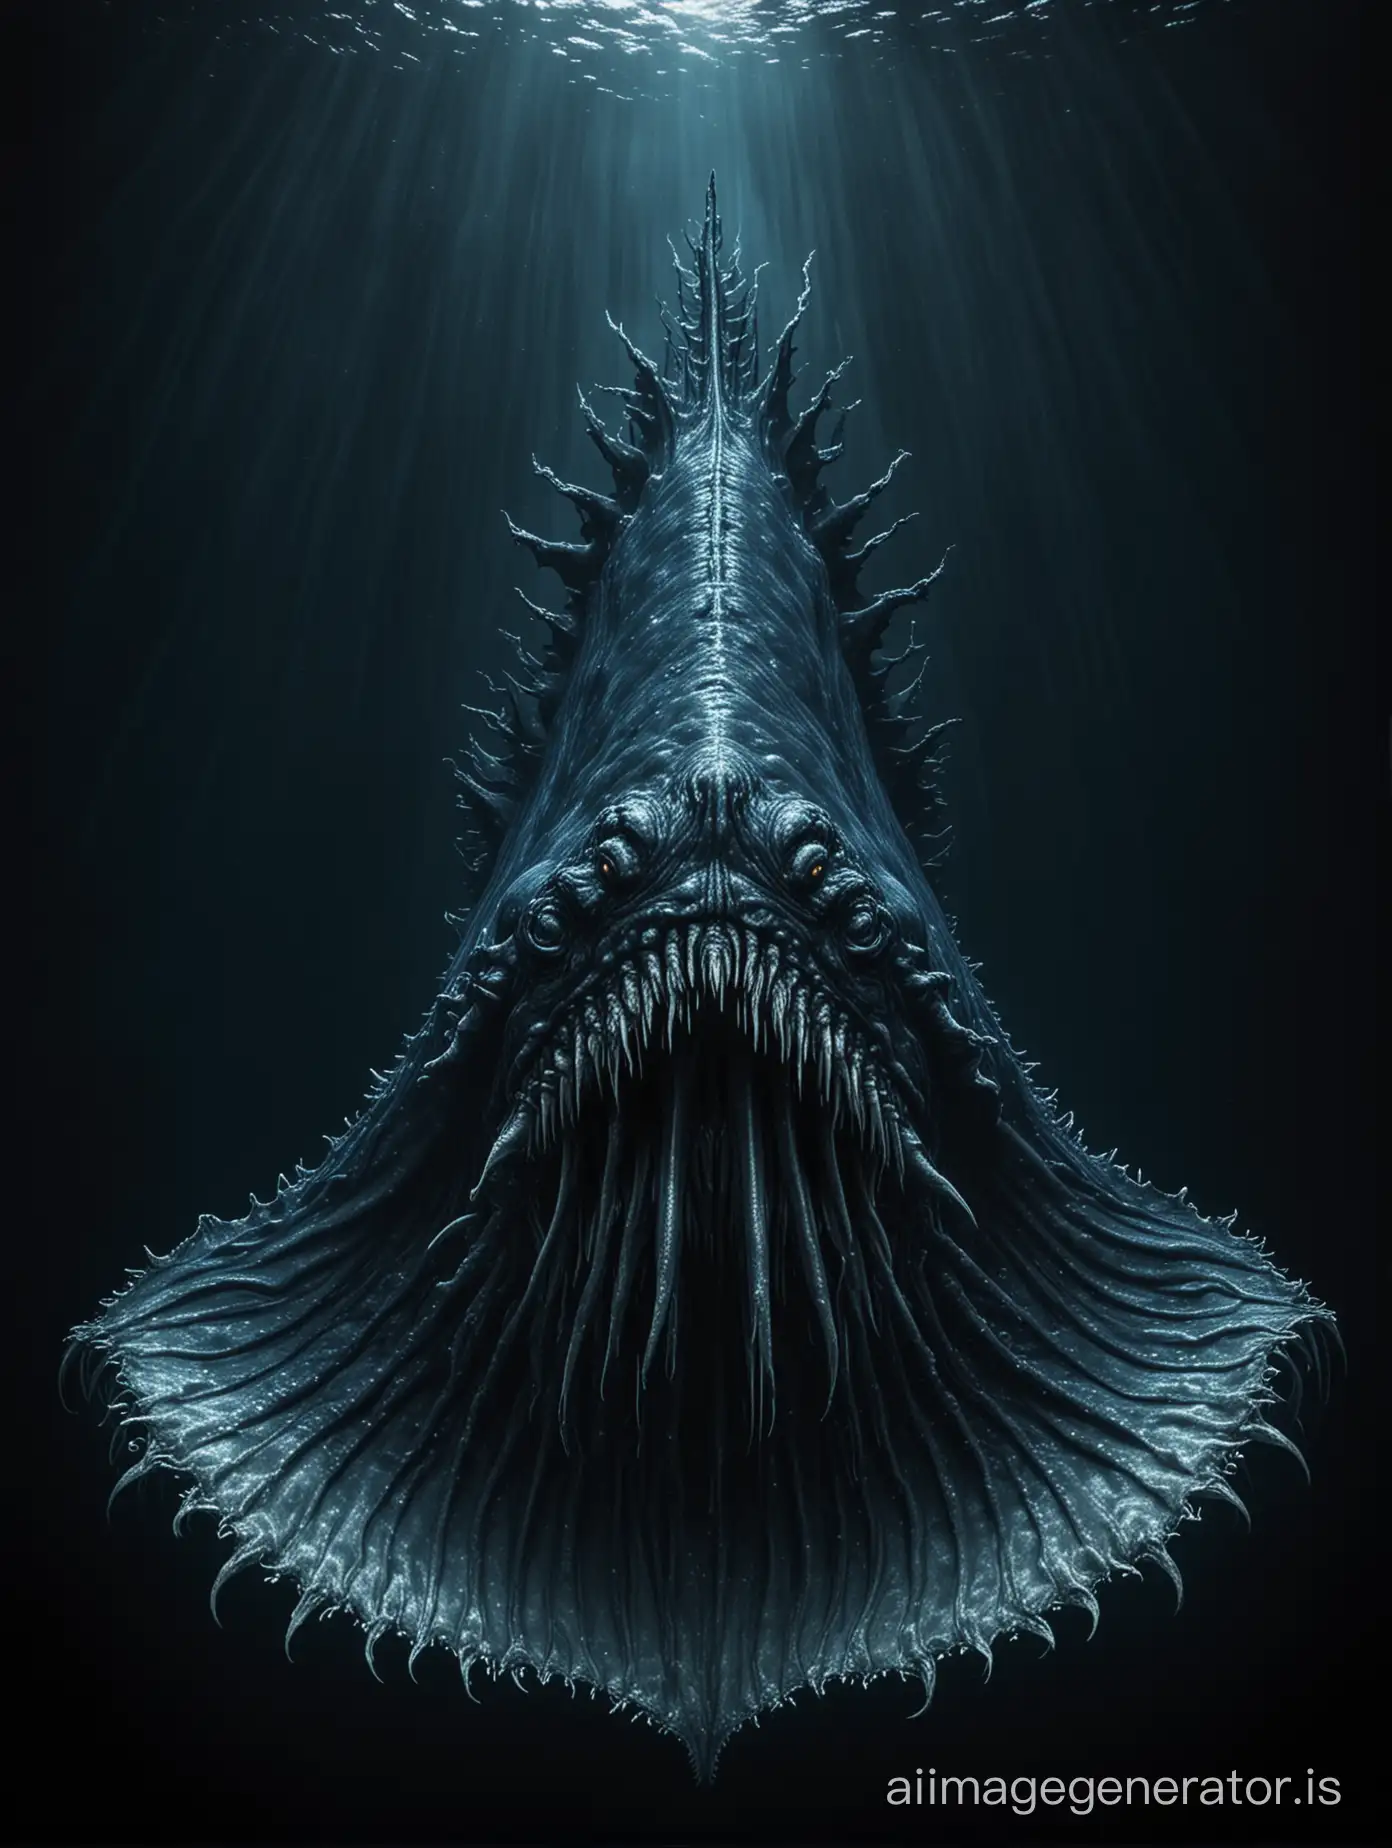 Majestic-Deep-Sea-Creature-Emerging-from-the-Dark-Blue-Abyss